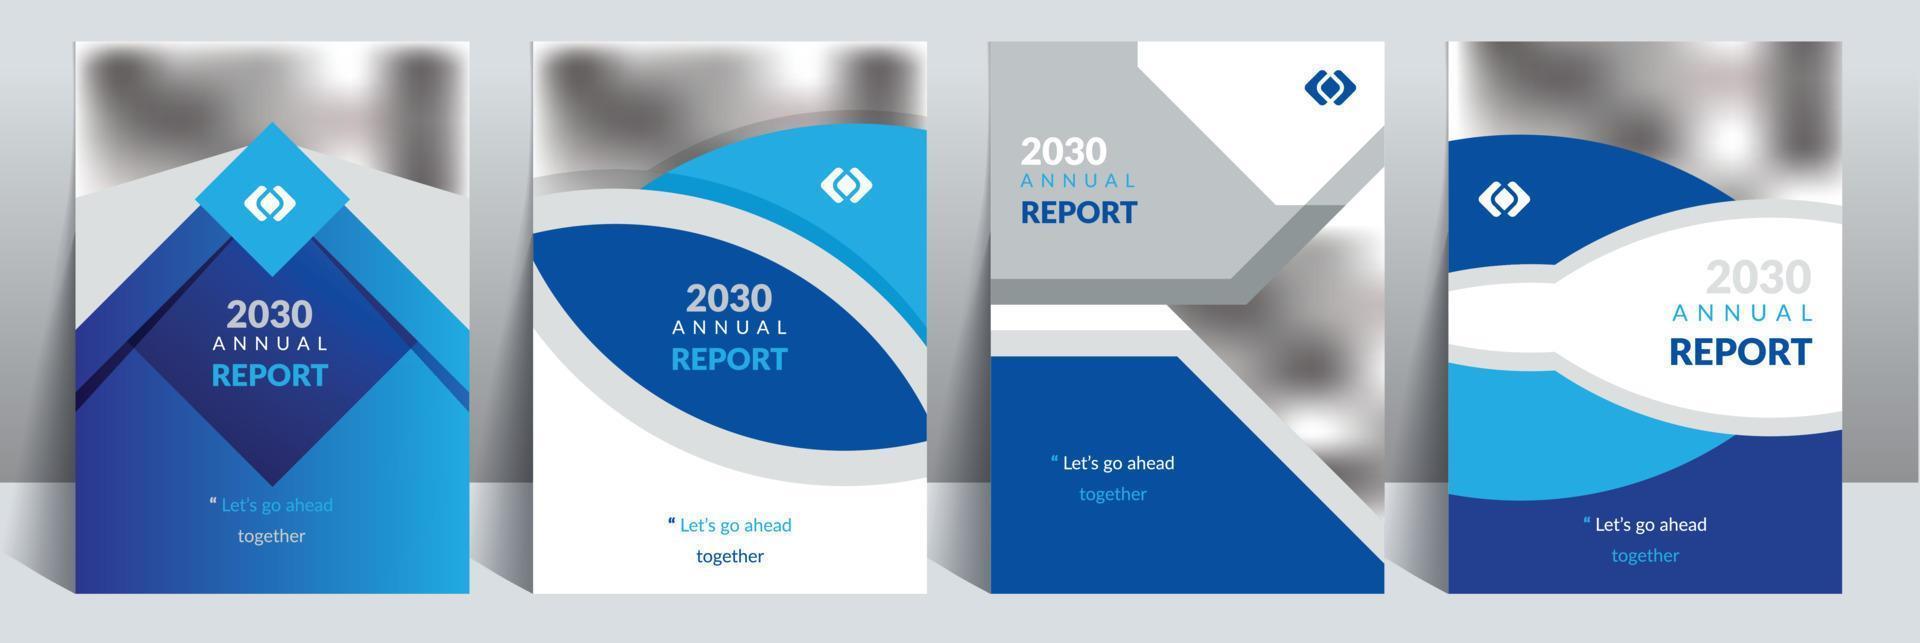 Annual Report Catalog Cover Design Template Concept adept to multipurpose Project vector